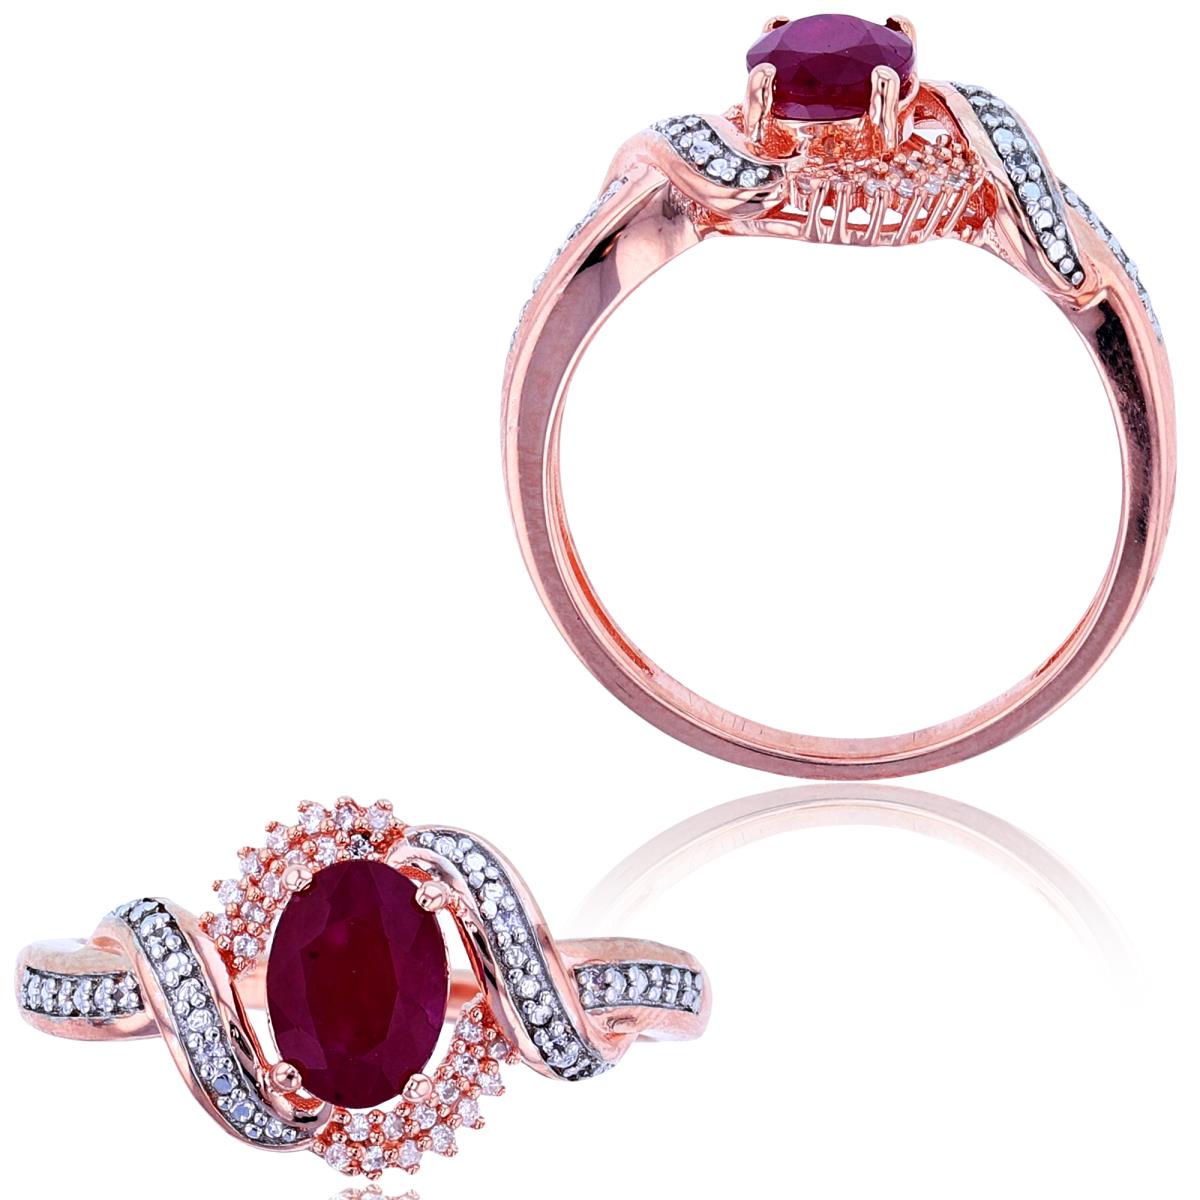 Sterling Silver+RG Plating Rnd CZ (0.102cttw) & 7x5mm Oval Ruby Ring